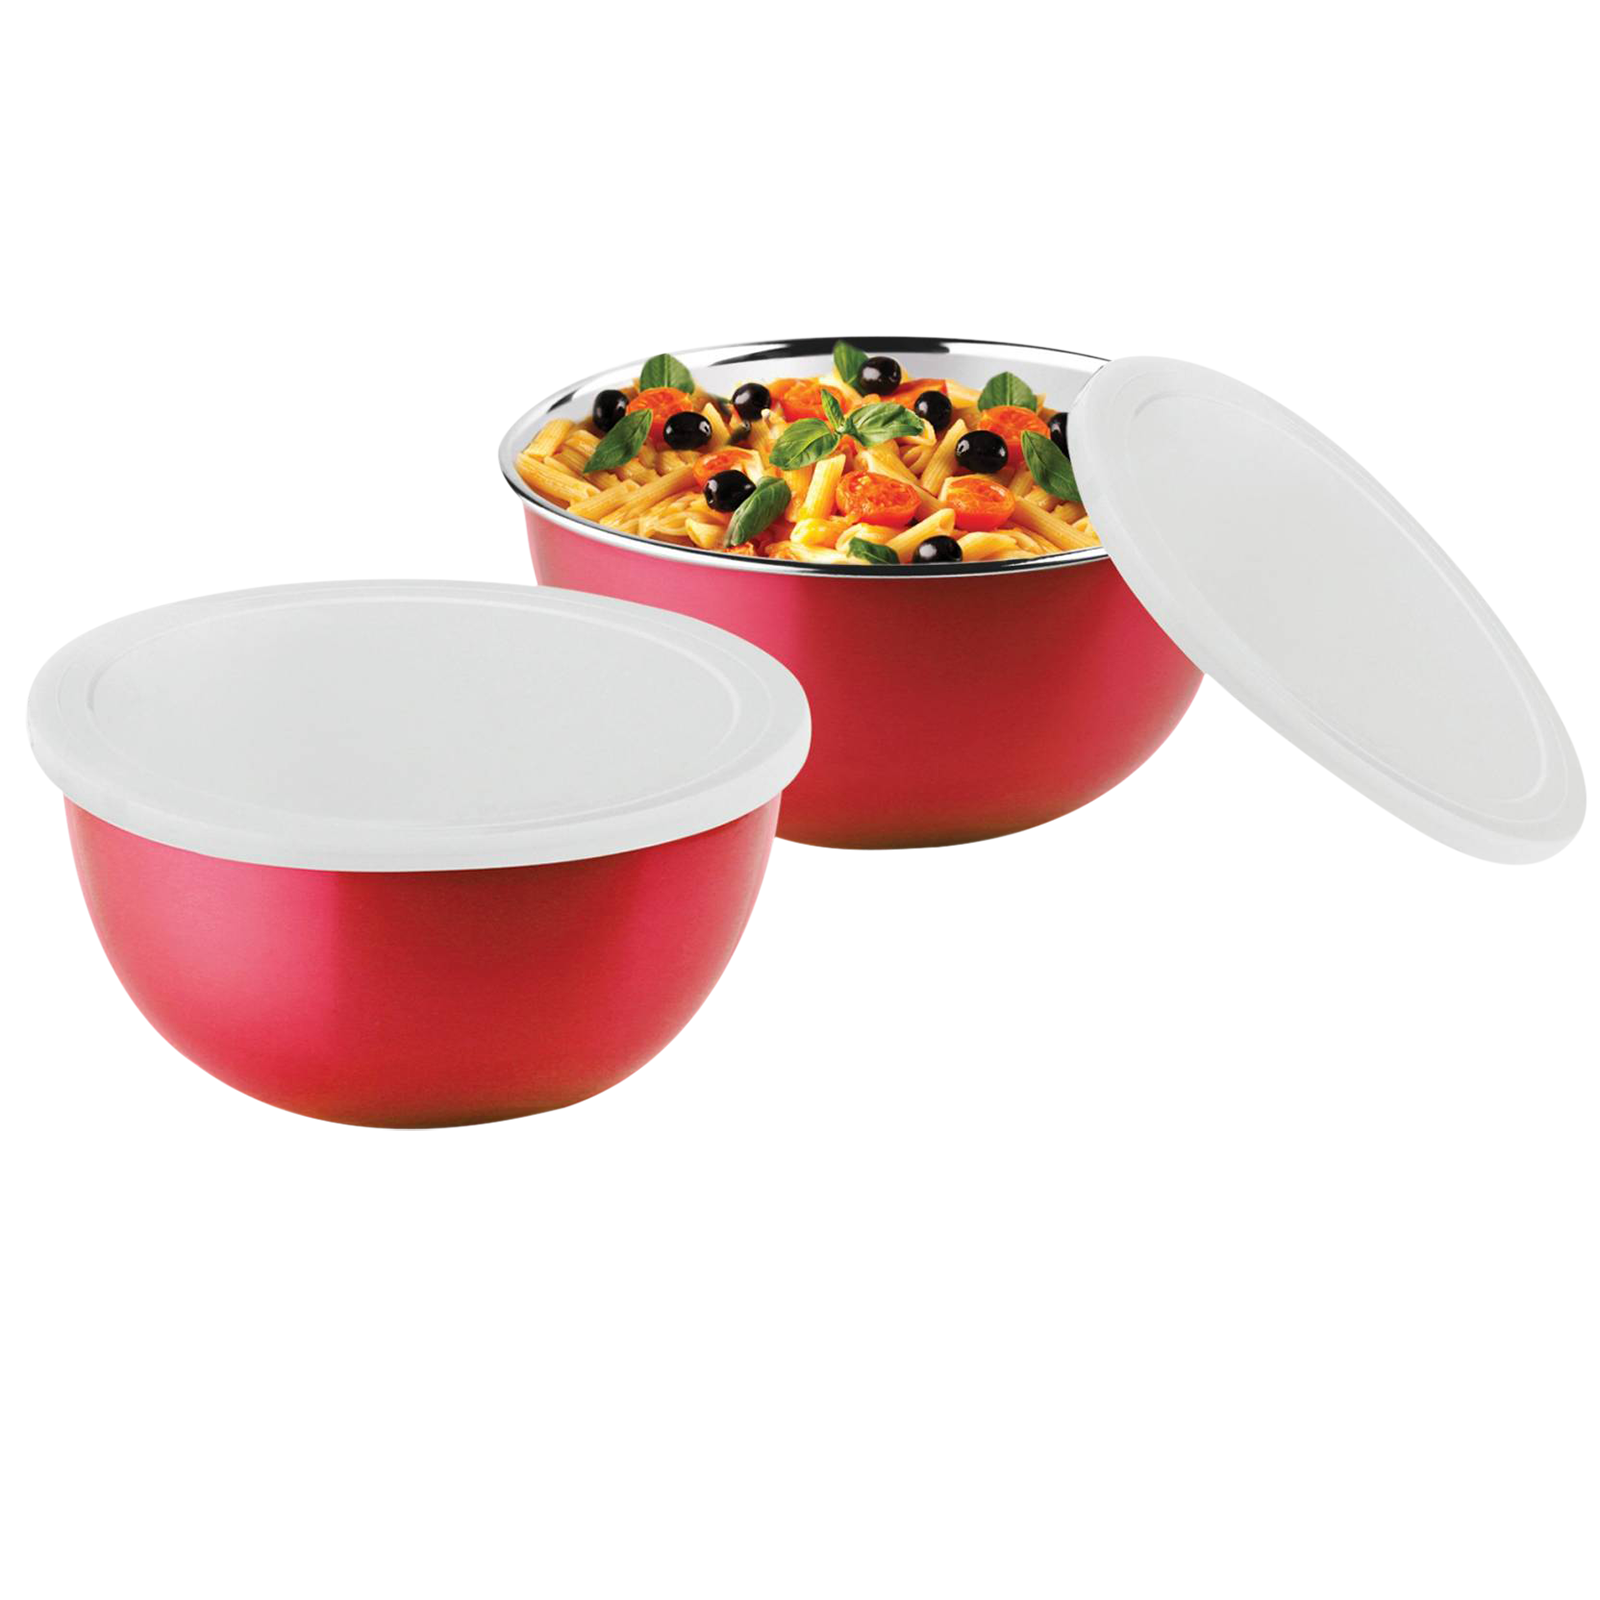 Bonita Microwave Safe Stainless Steel 2 Small Bowls (KS01-A3RD, Red)_1